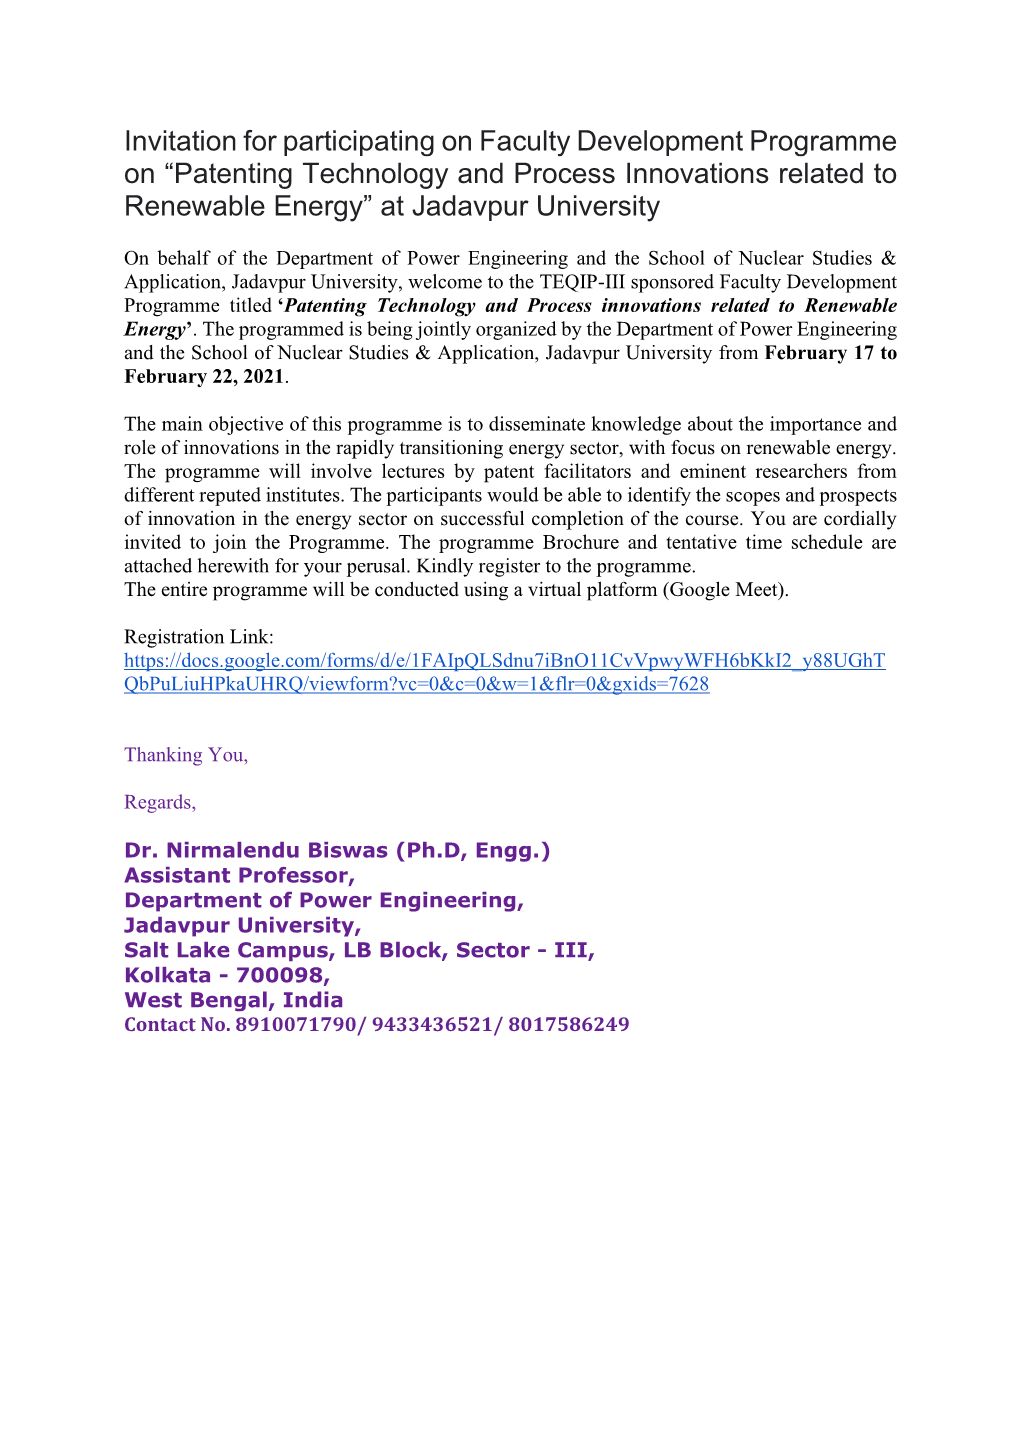 Invitation for Participating on Faculty Development Programme on “Patenting Technology and Process Innovations Related to Renewable Energy” at Jadavpur University